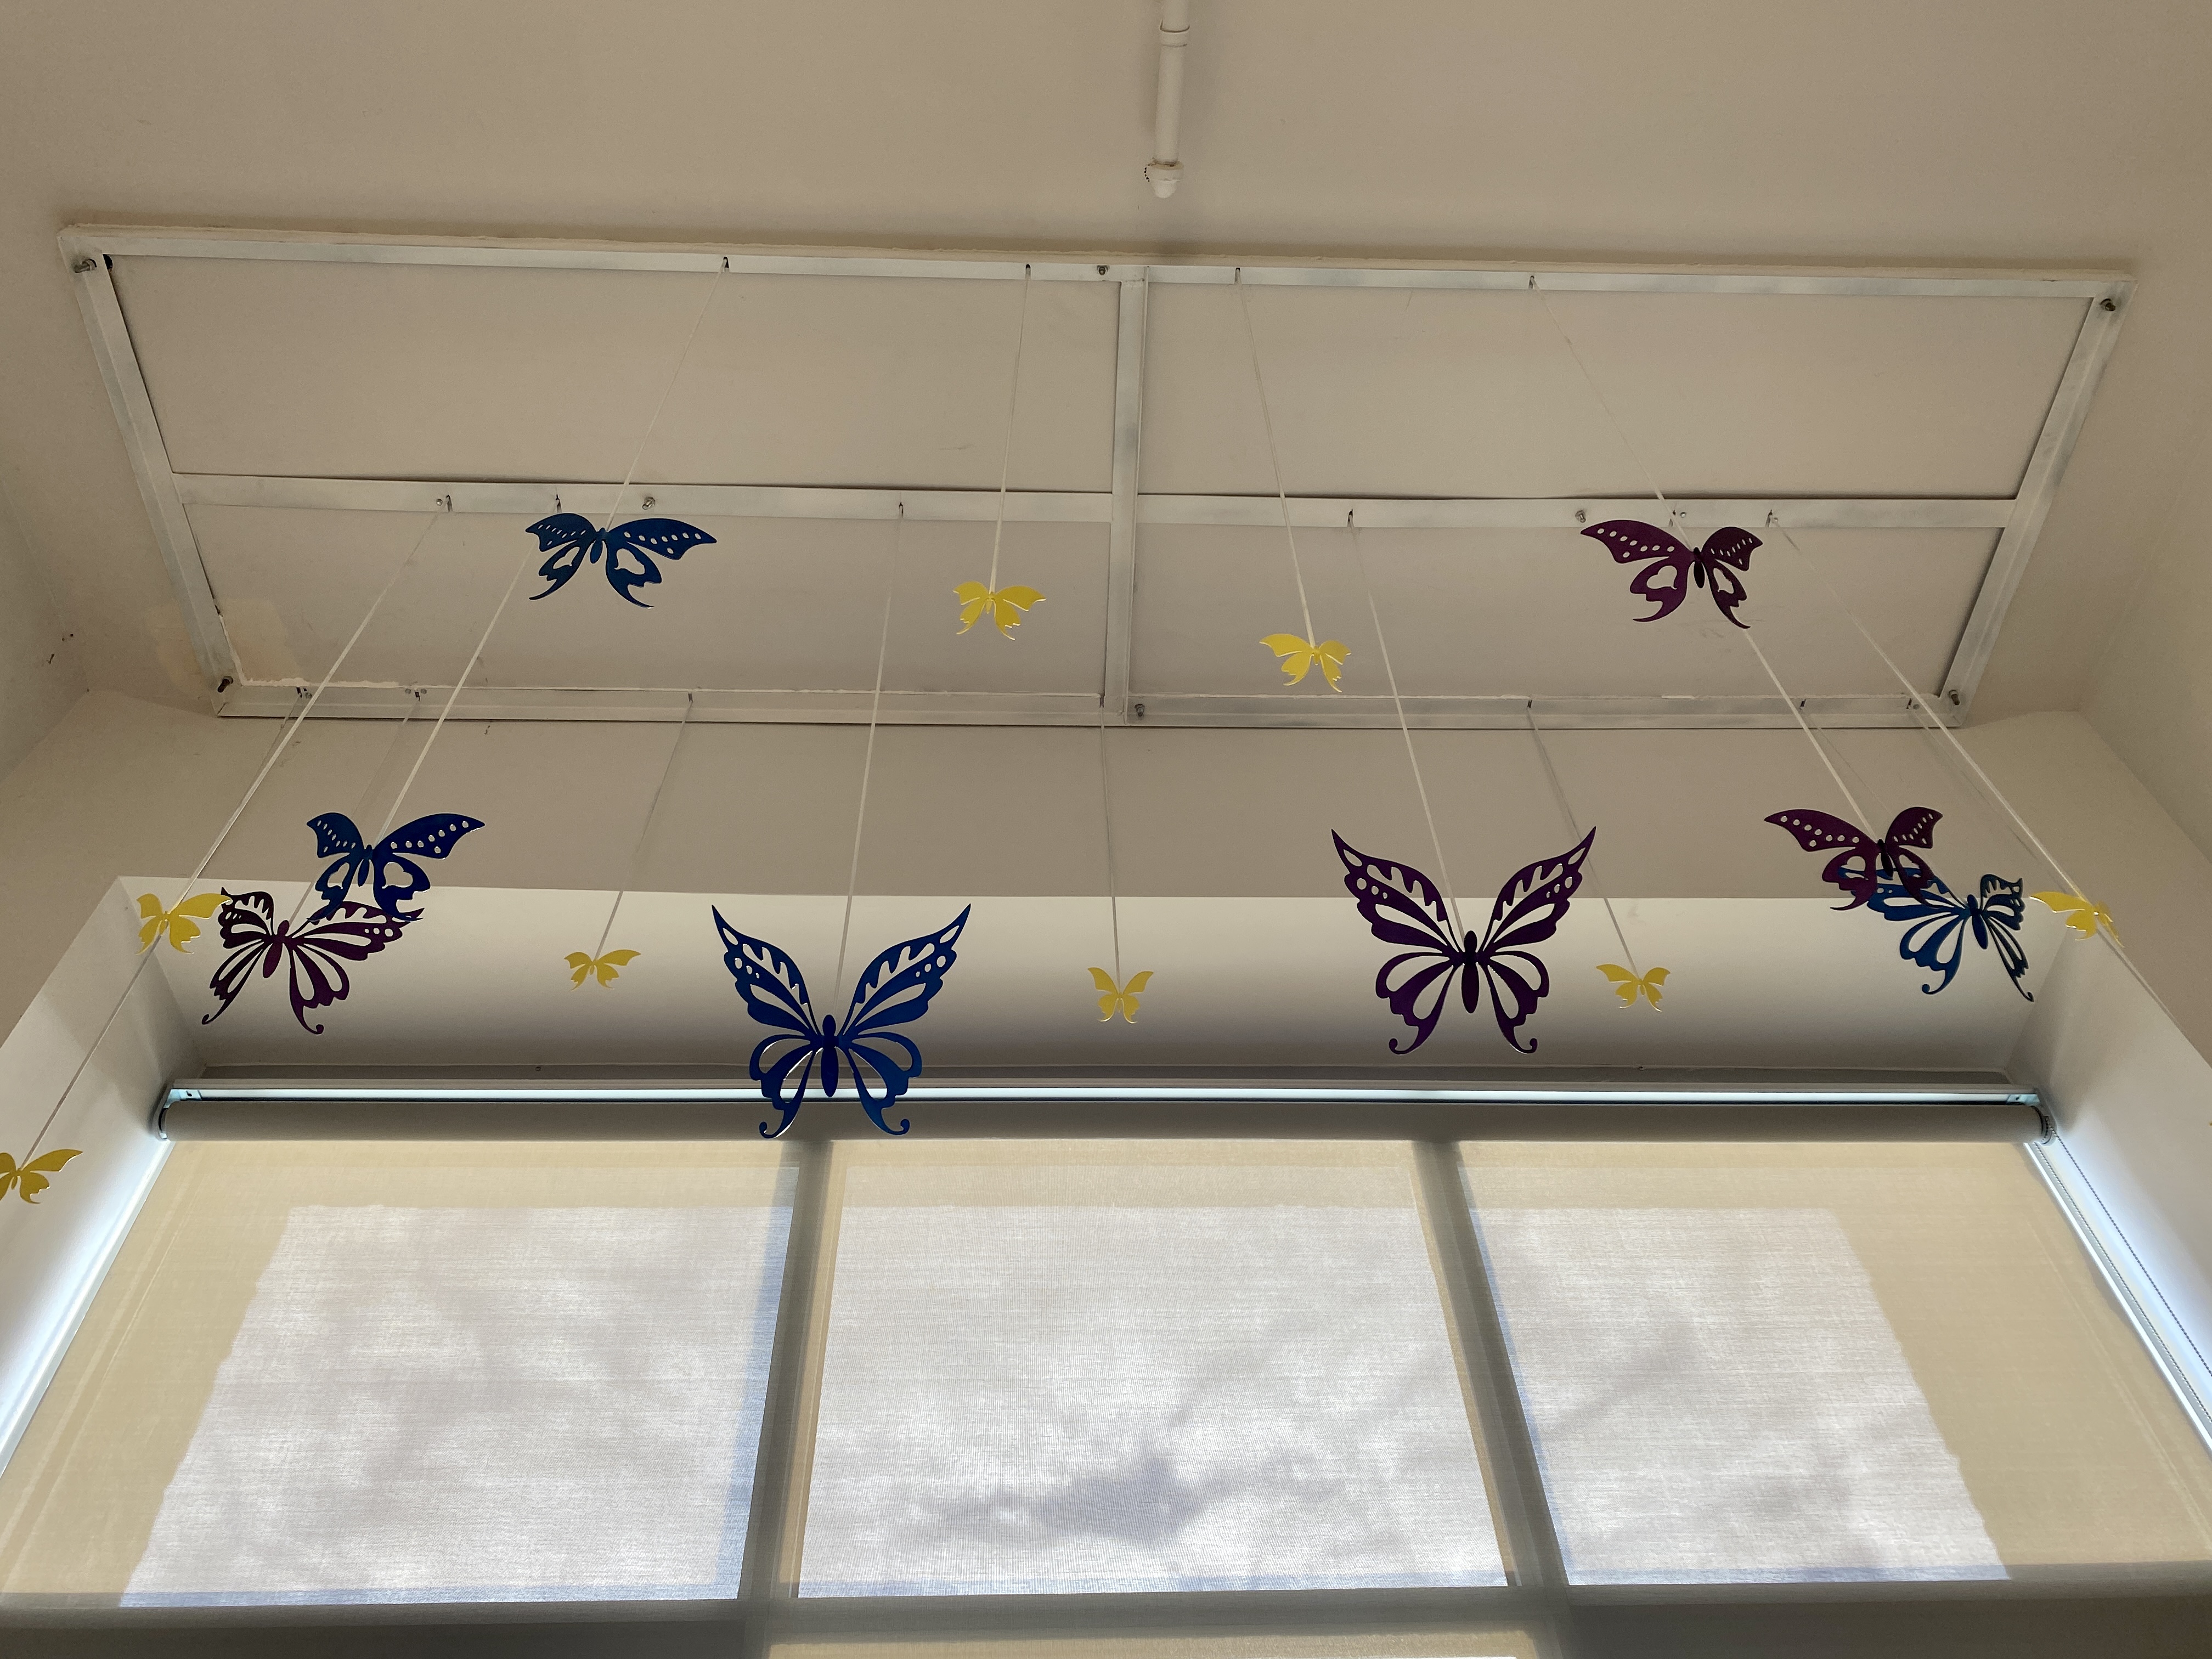 Image of paper butterflies hanging from the ceiling.